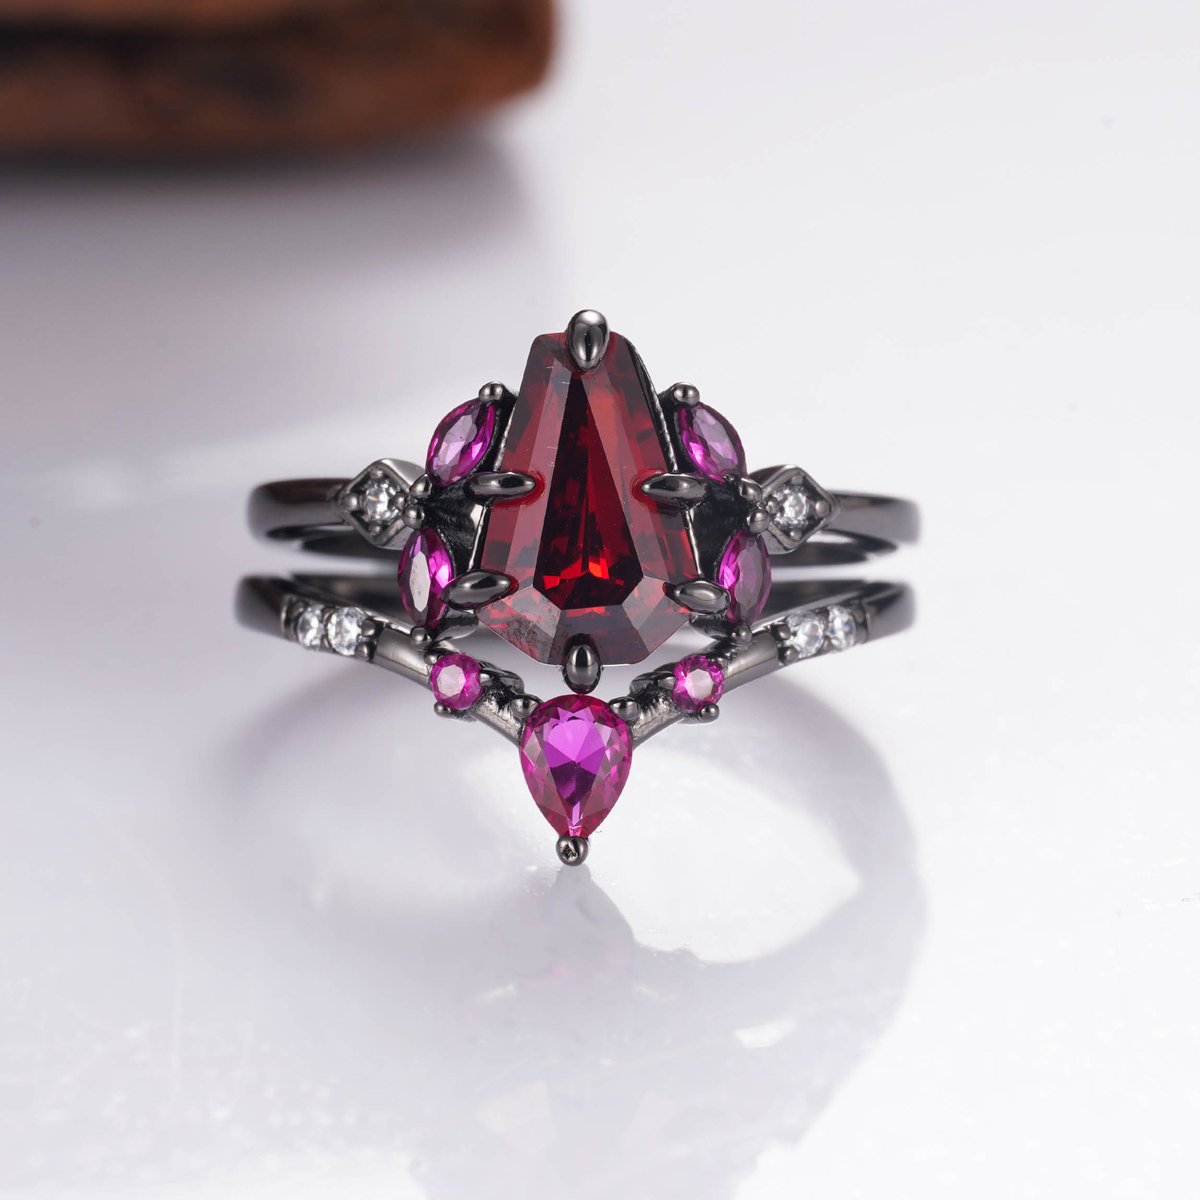 Skye Coffin Deep Red Garnet Ring Set Gothic Pink Sapphire Black Sterling Silver Engagement Ring For Woman Unique Gothic Promise For Her tuppu.net/61ccc75f #Etsy #KherishJewelry #GirlfriendGift